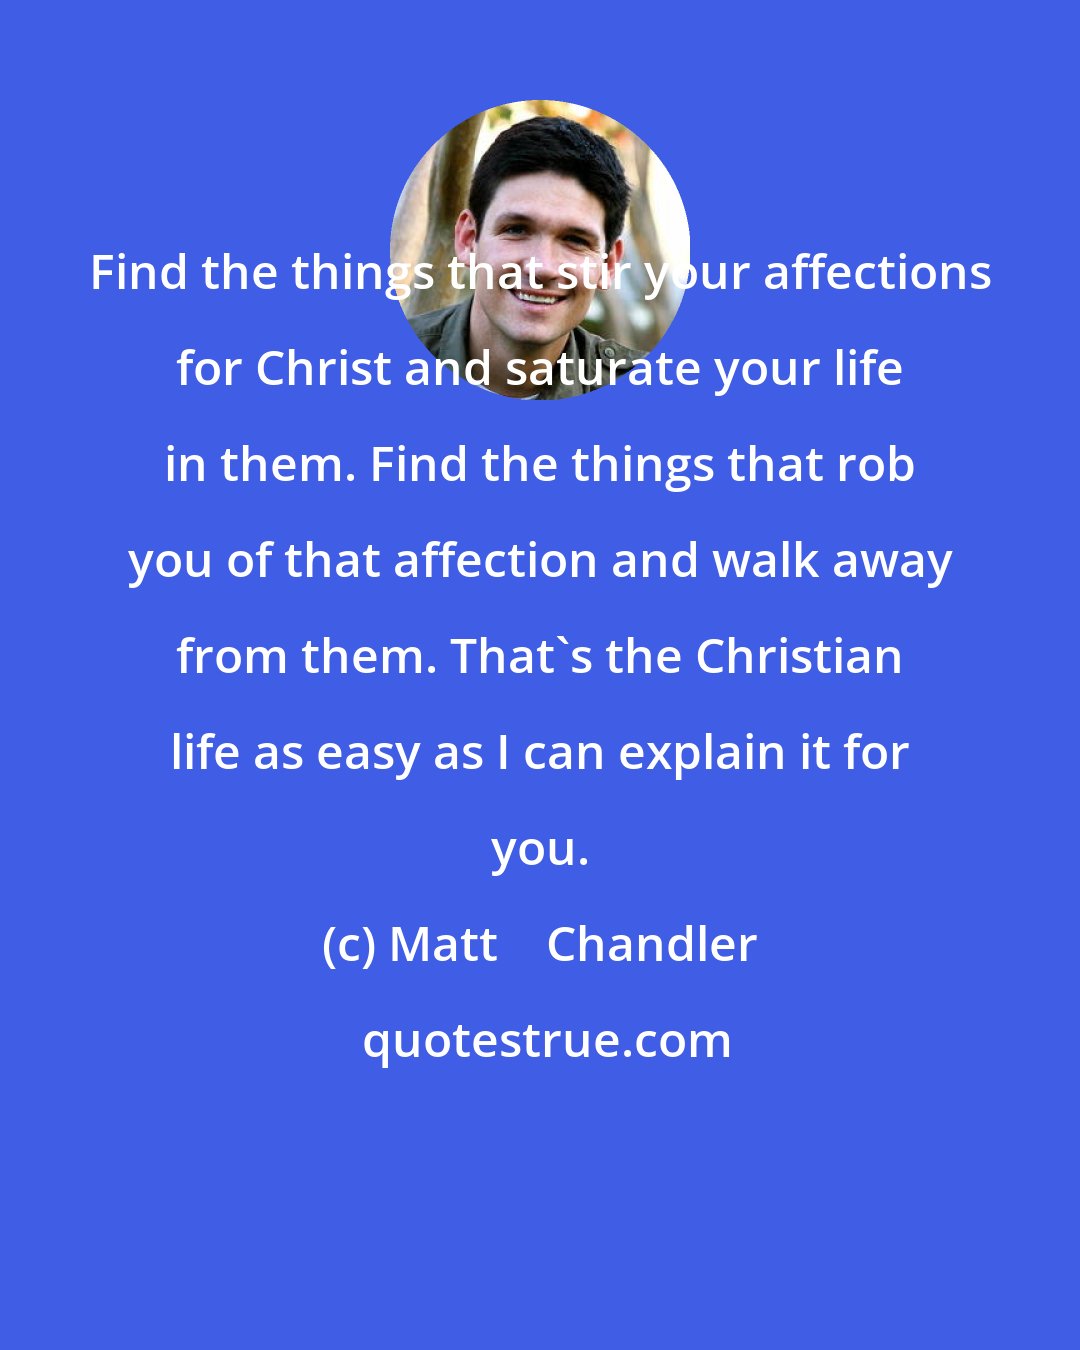 Matt    Chandler: Find the things that stir your affections for Christ and saturate your life in them. Find the things that rob you of that affection and walk away from them. That's the Christian life as easy as I can explain it for you.